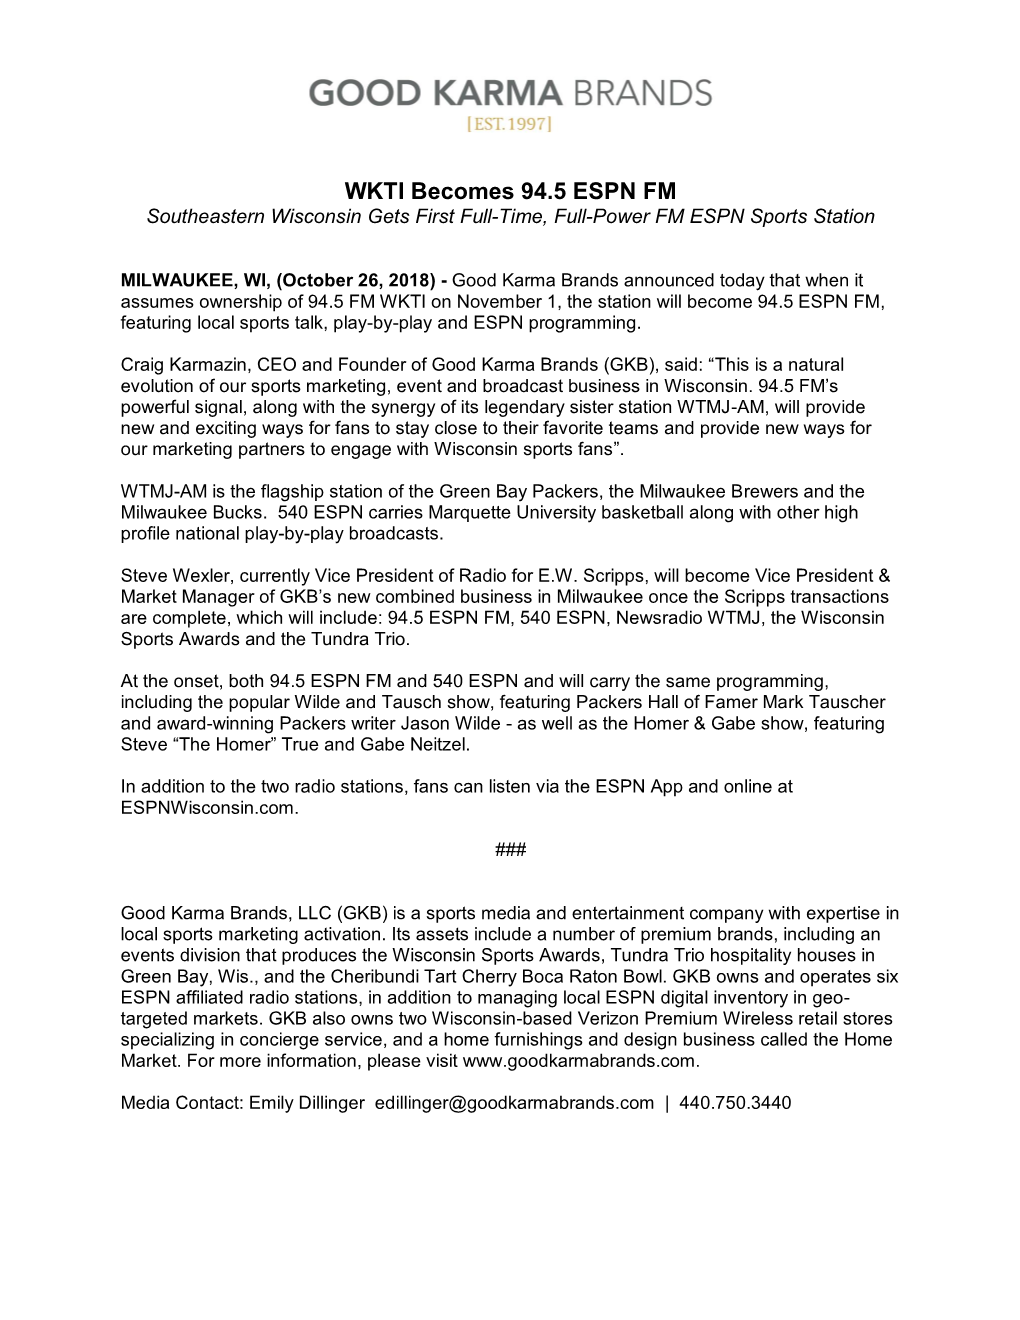 WKTI Becomes 94.5 ESPN FM Southeastern Wisconsin Gets First Full-Time, Full-Power FM ESPN Sports Station